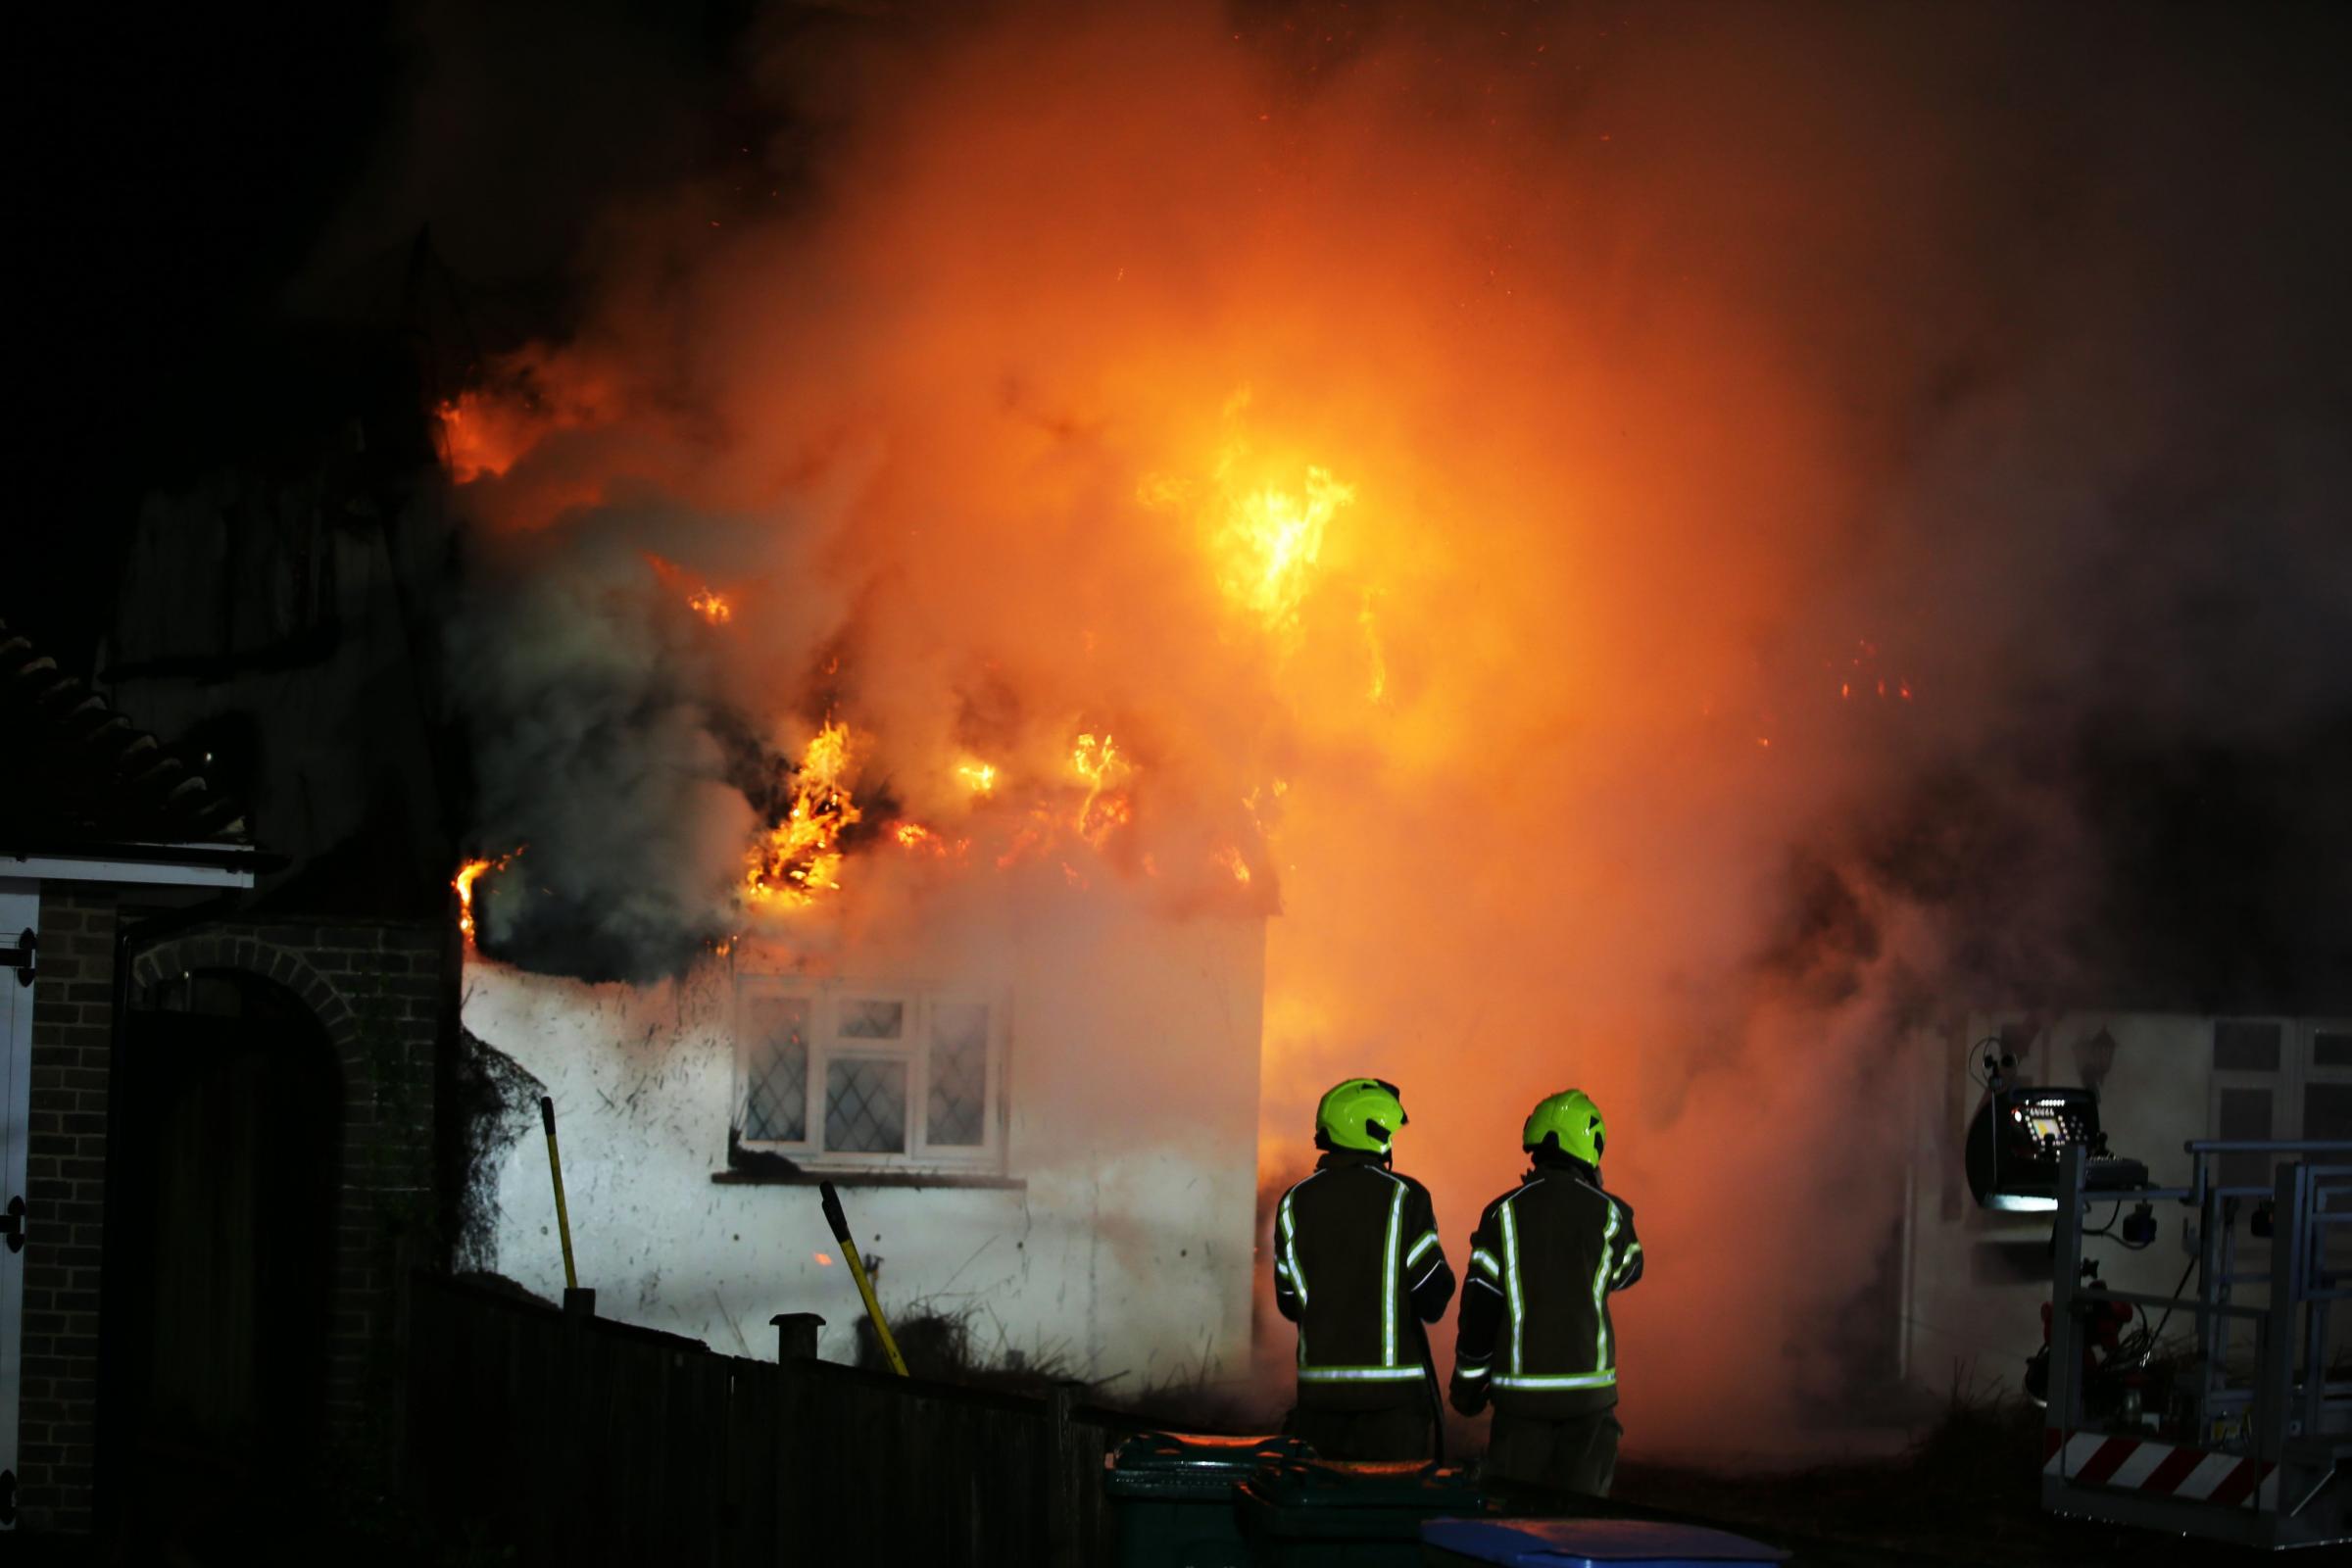 Firefighters called to thatched roof fire in Felpham